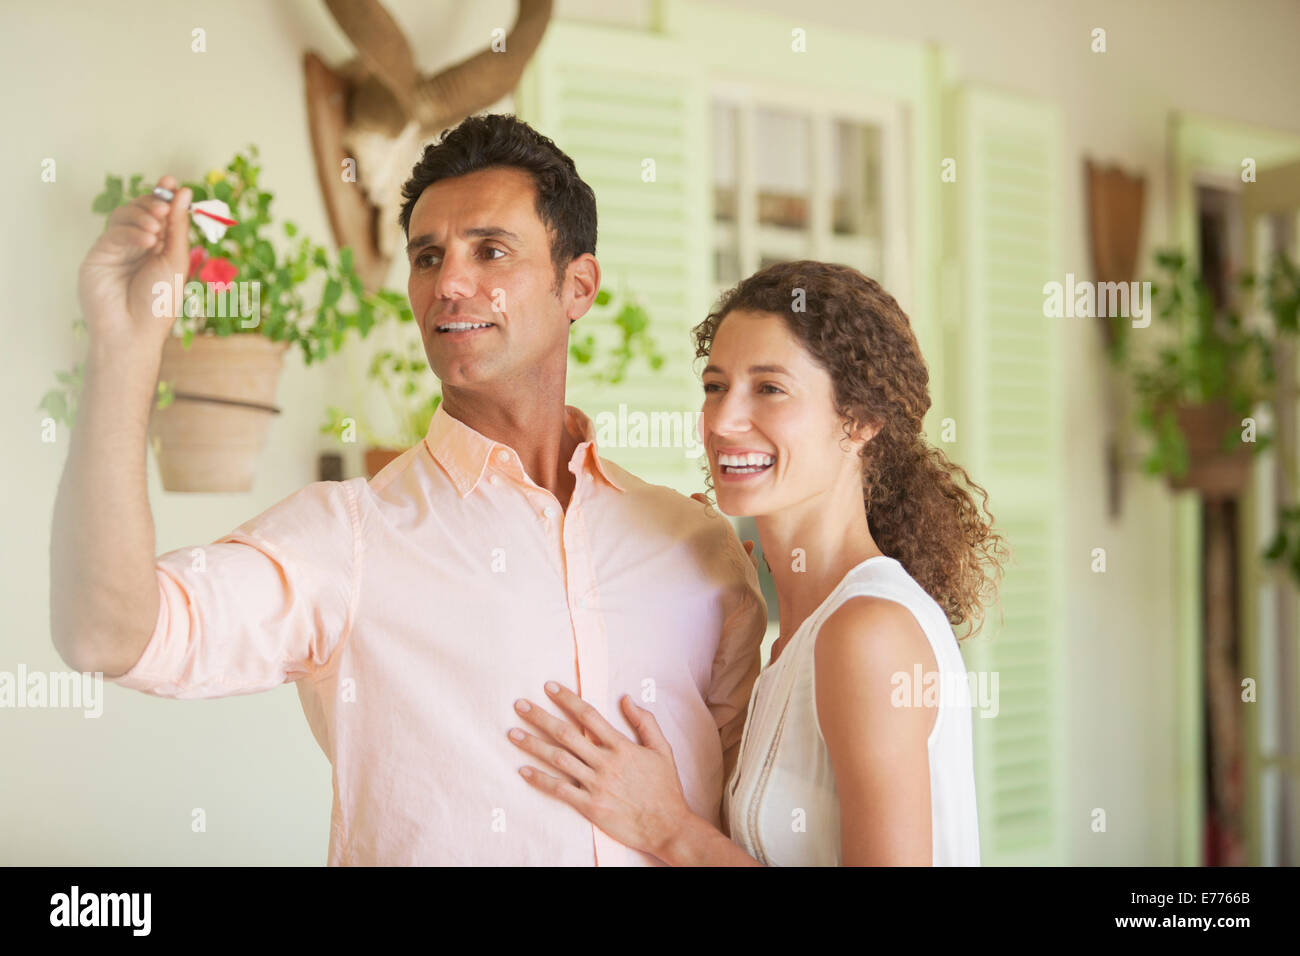 Couple playing darts game together Stock Photo